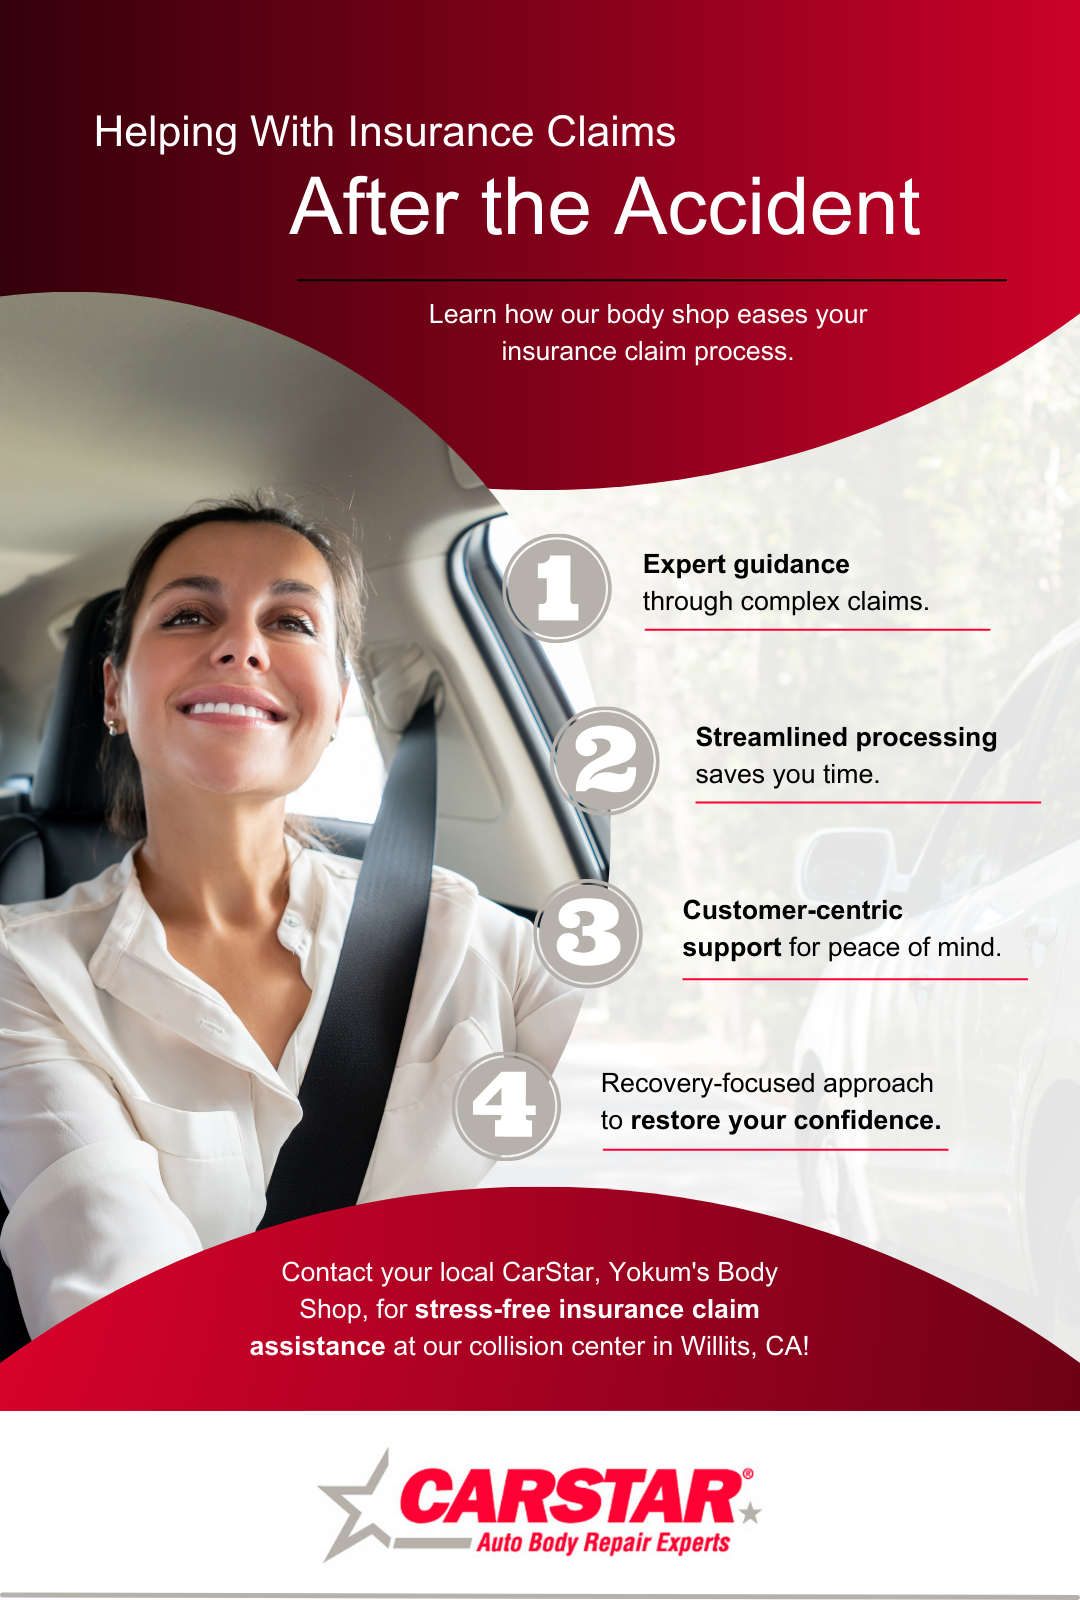 M37429 - CarStar - 9lkp - DESIGN Infographic - Helping With Insurance Claims After the Accident.png